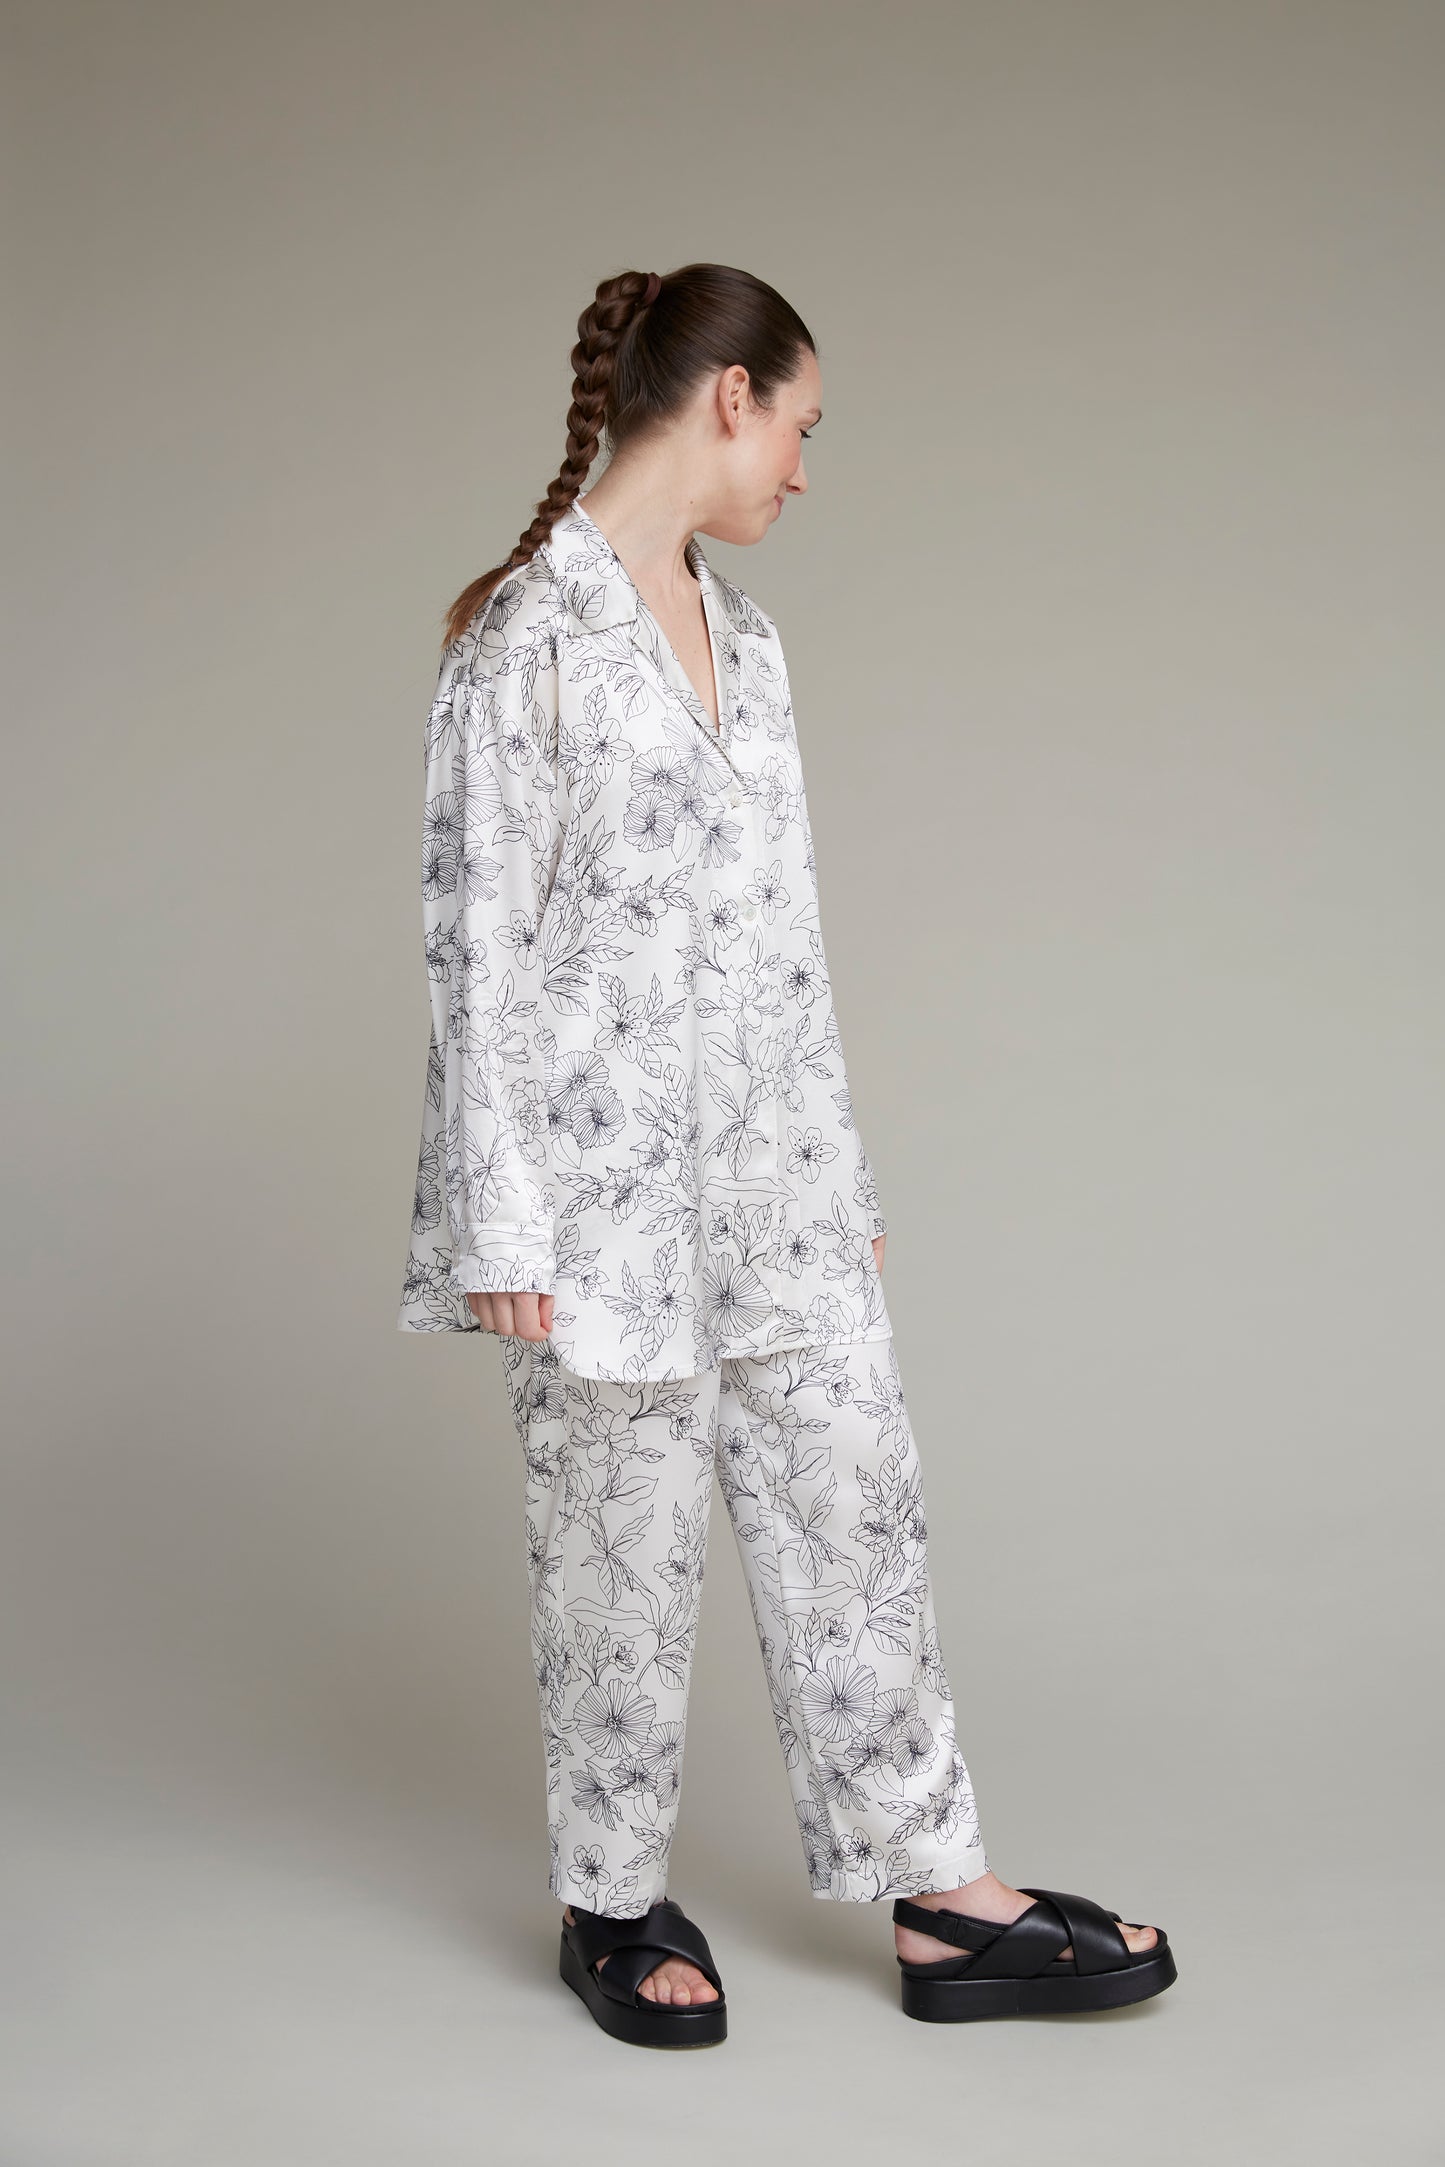 Woman in left-facing white floral-print loungewear pajama set, paired with black sandals, against neutral background, with long braid.